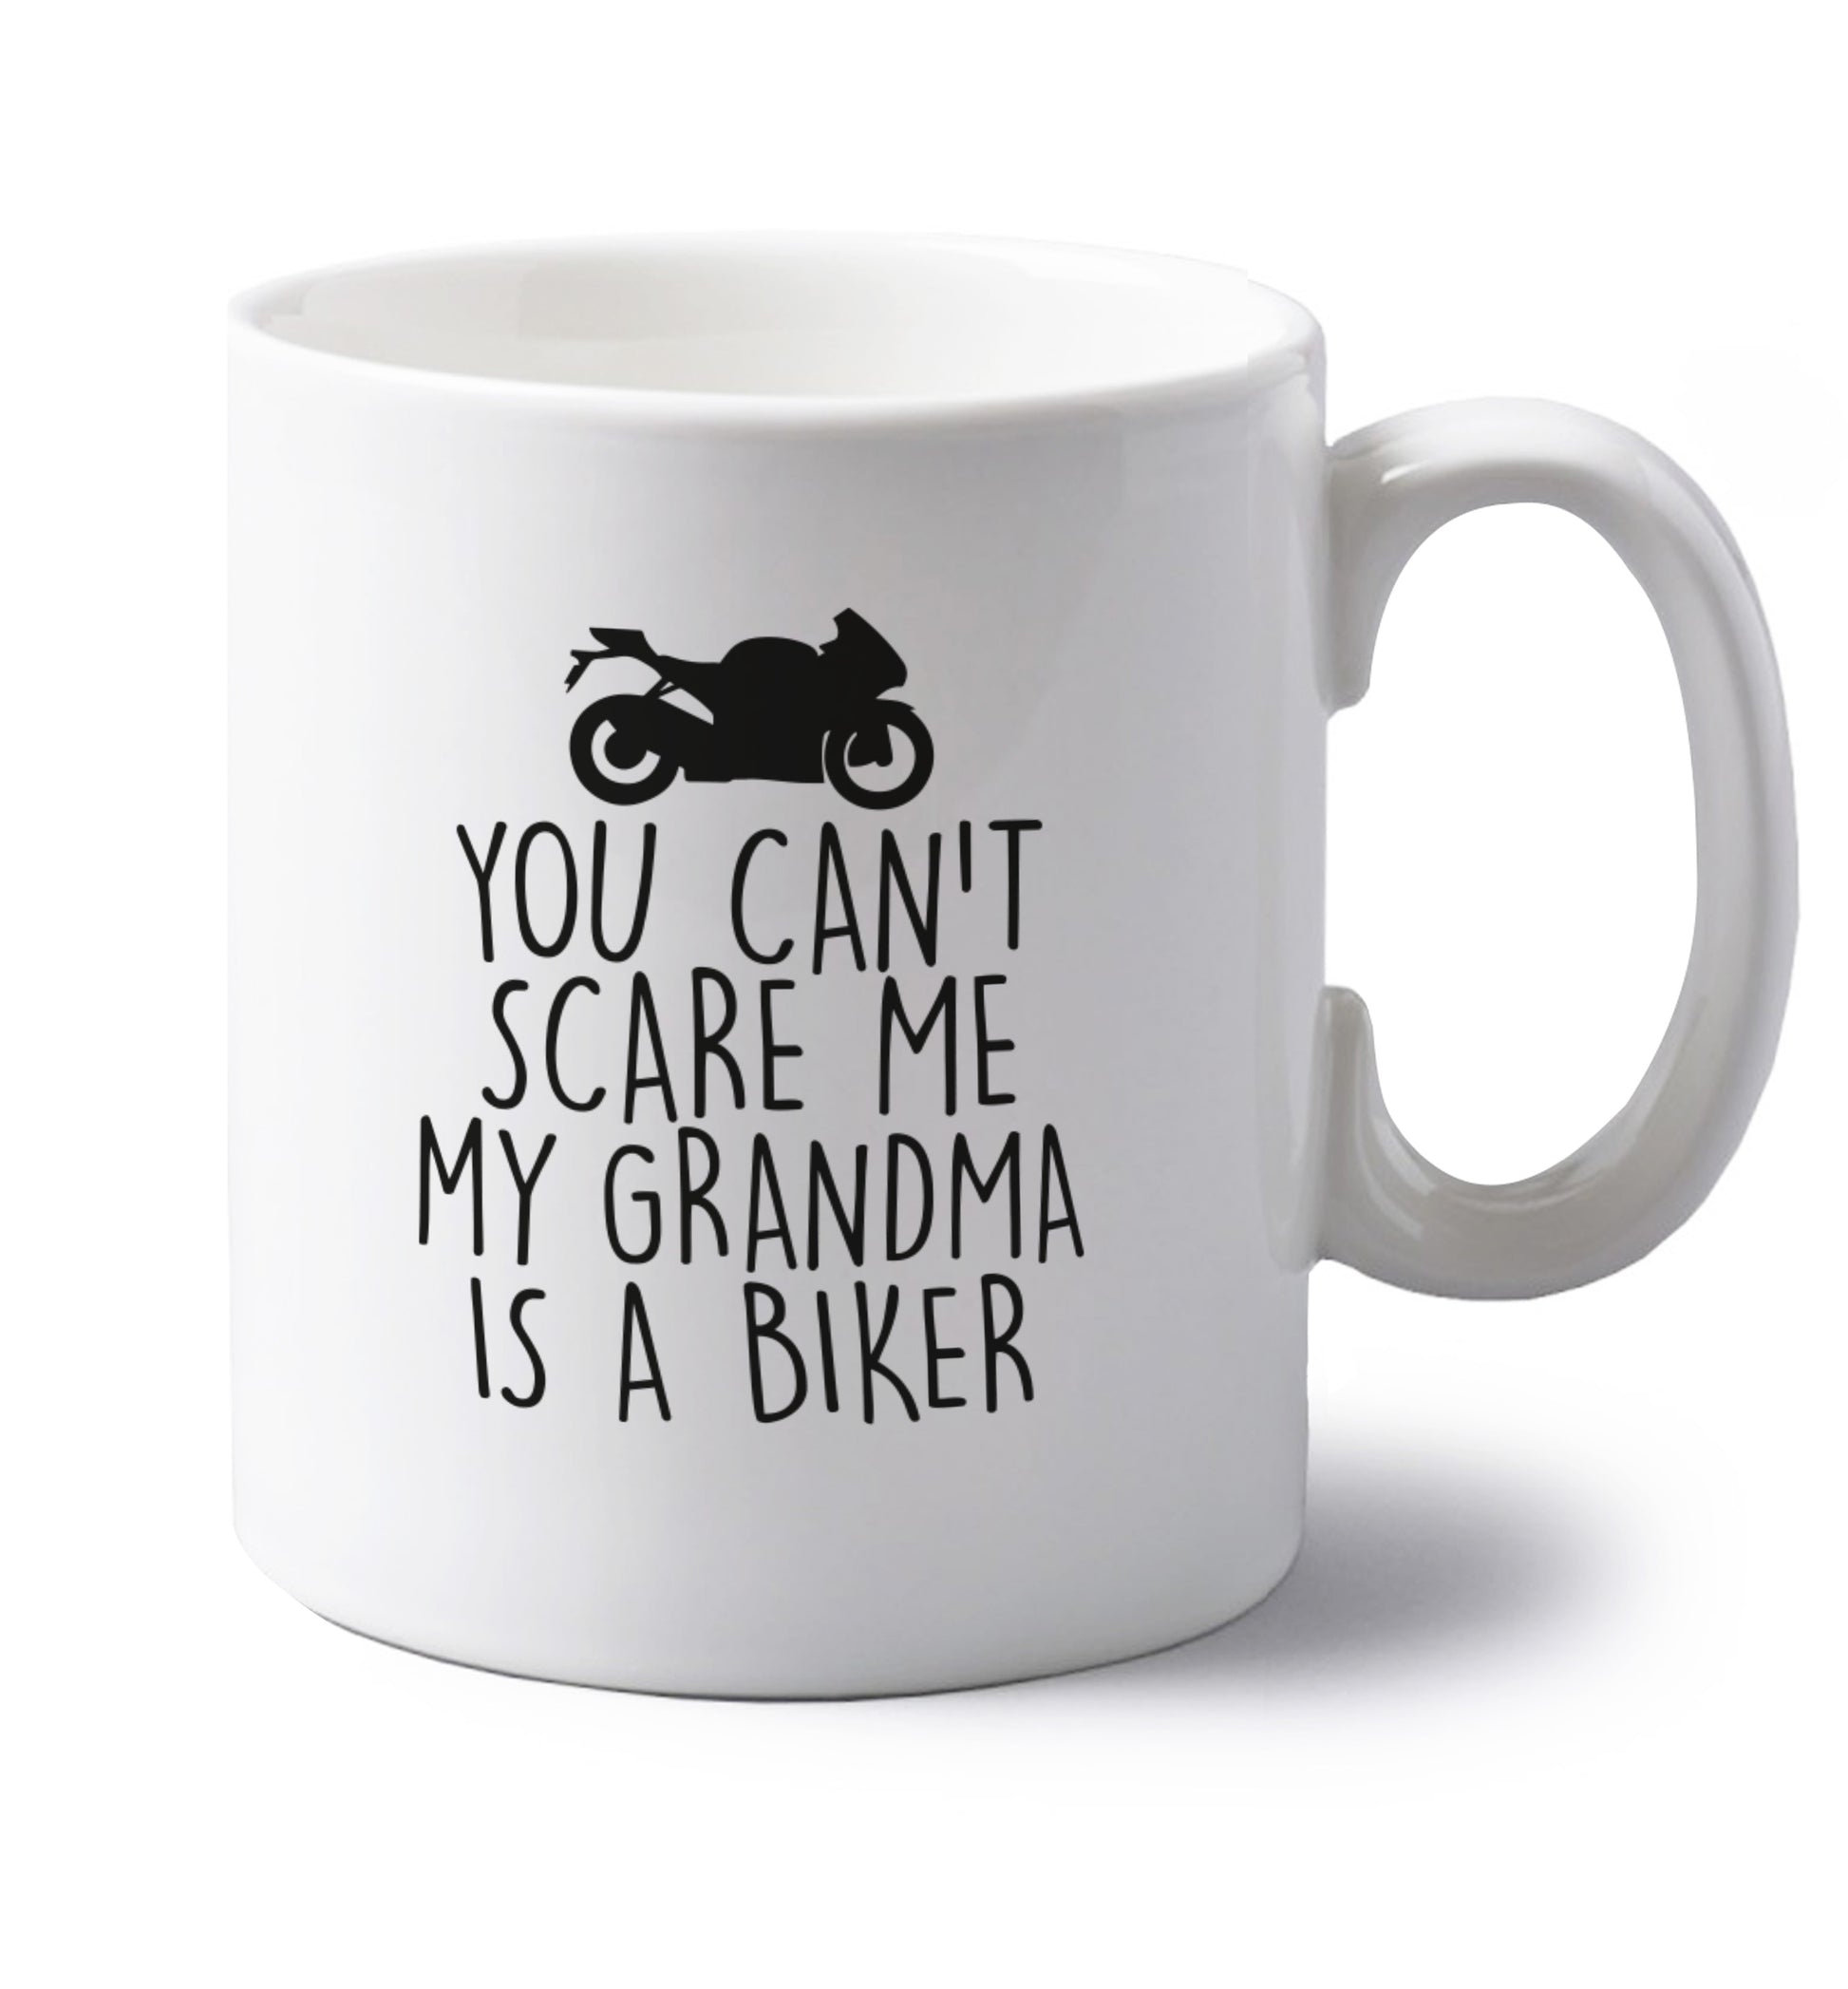 You can't scare me my grandma is a biker left handed white ceramic mug 